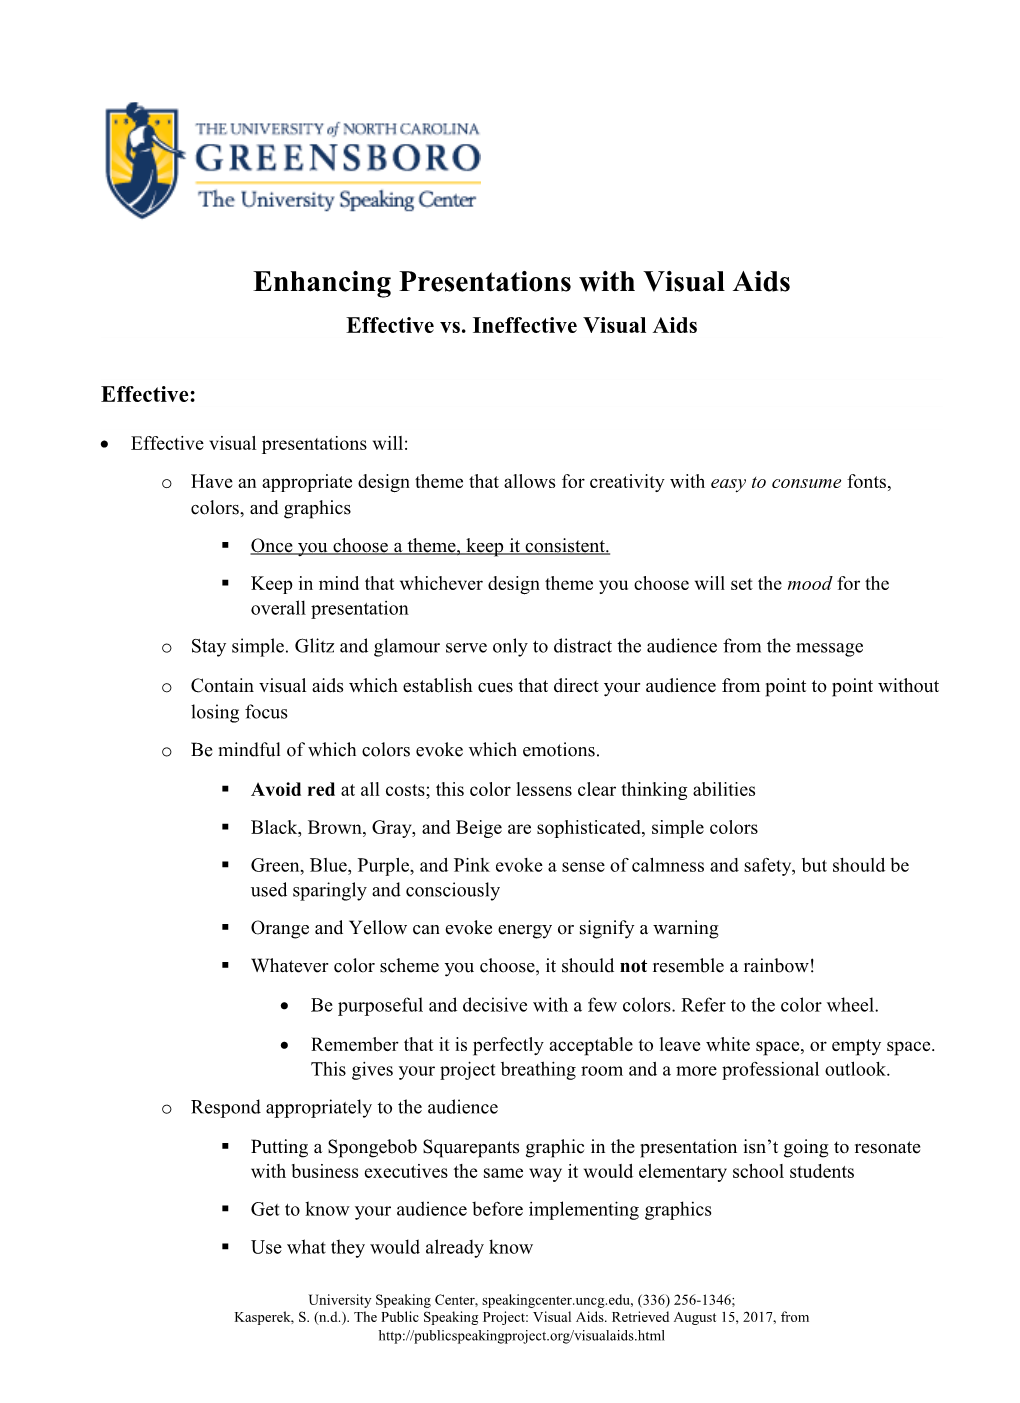 Enhancing Presentations with Visual Aids